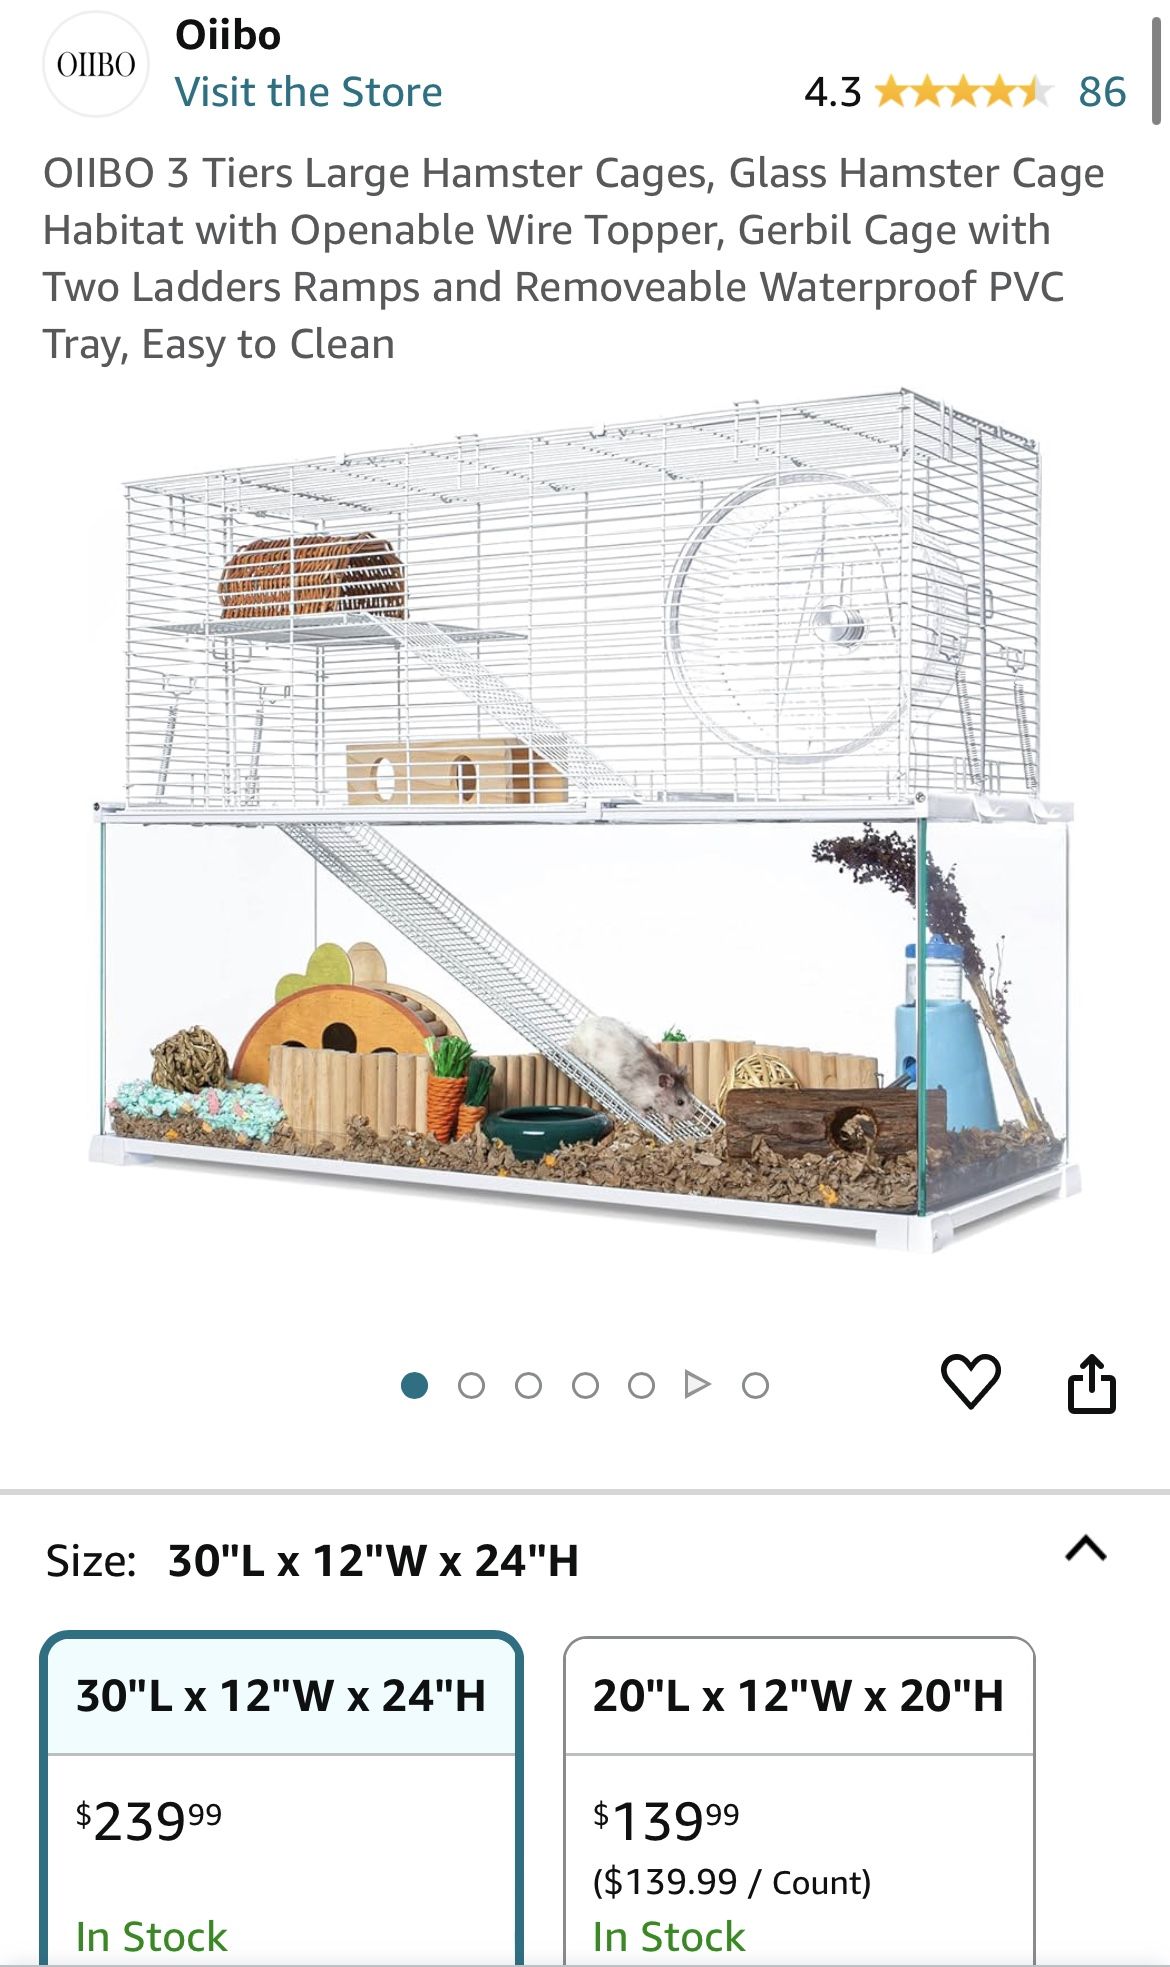 OIIBO 3 Tiers Large Hamster Cages, Glass Hamster Cage Habitat with Openable Wire Topper, Gerbil Cage with Two Ladders Ramps and Removeable Waterproof 